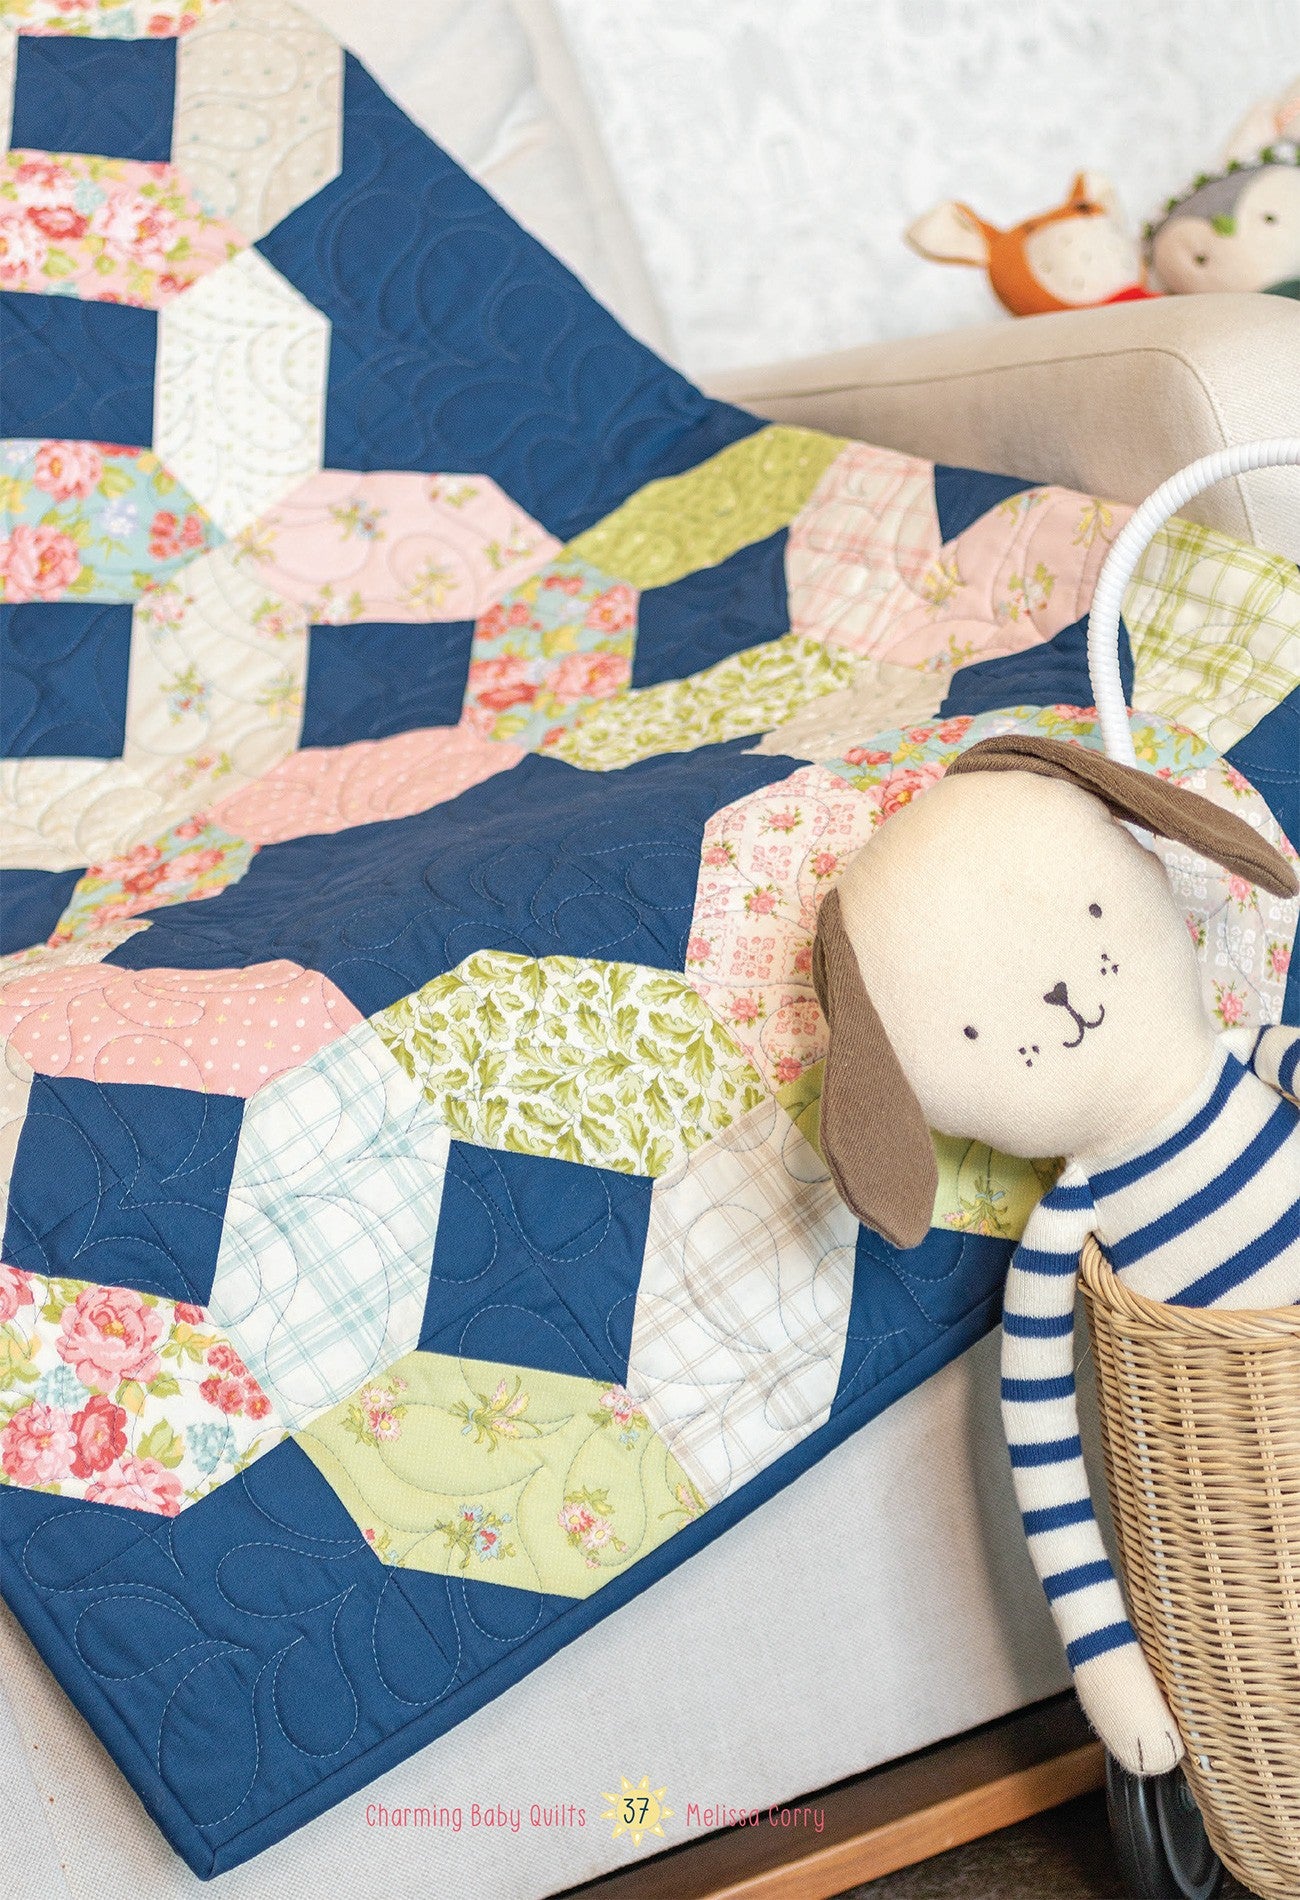 Charming Baby Quilts Pattern Book by Melissa Corry for It's Sew Emma